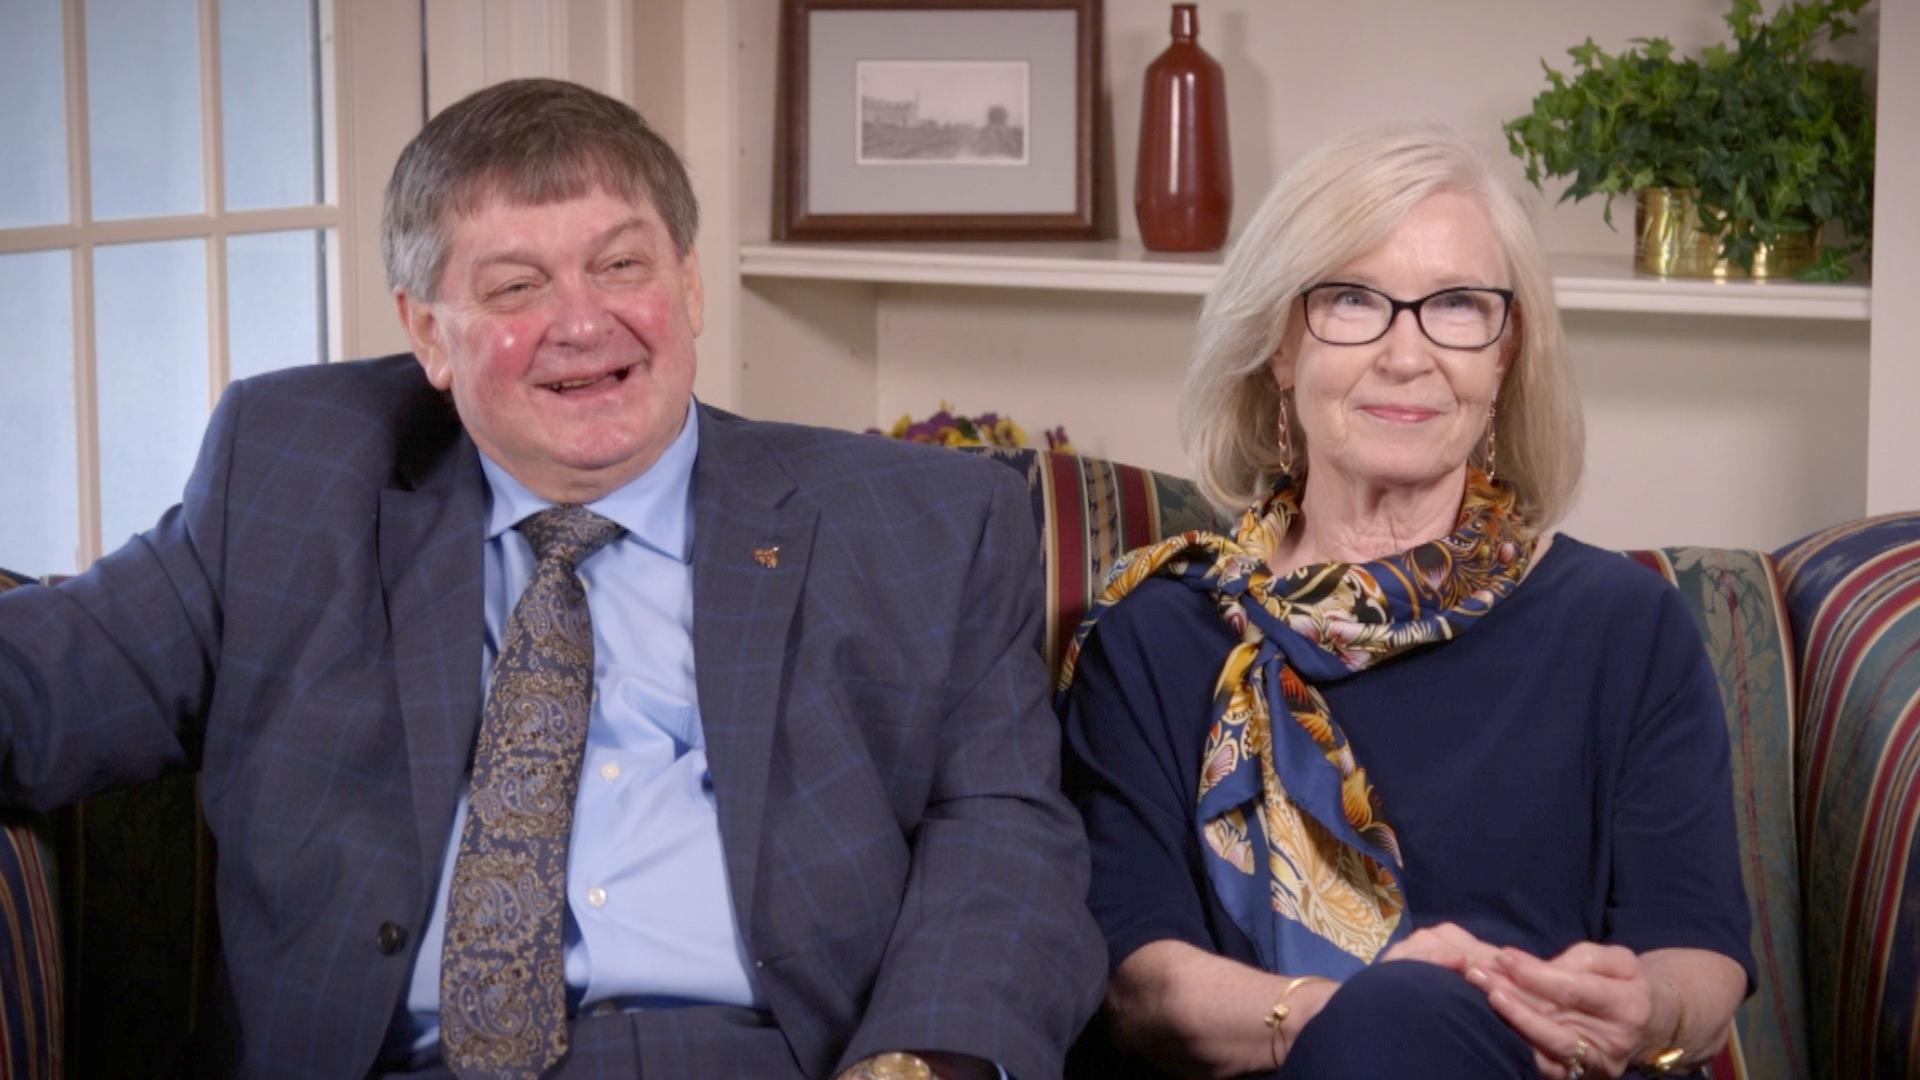 Glenda Chatham and Robert G. Clarke sitting on a couch looking at camera.